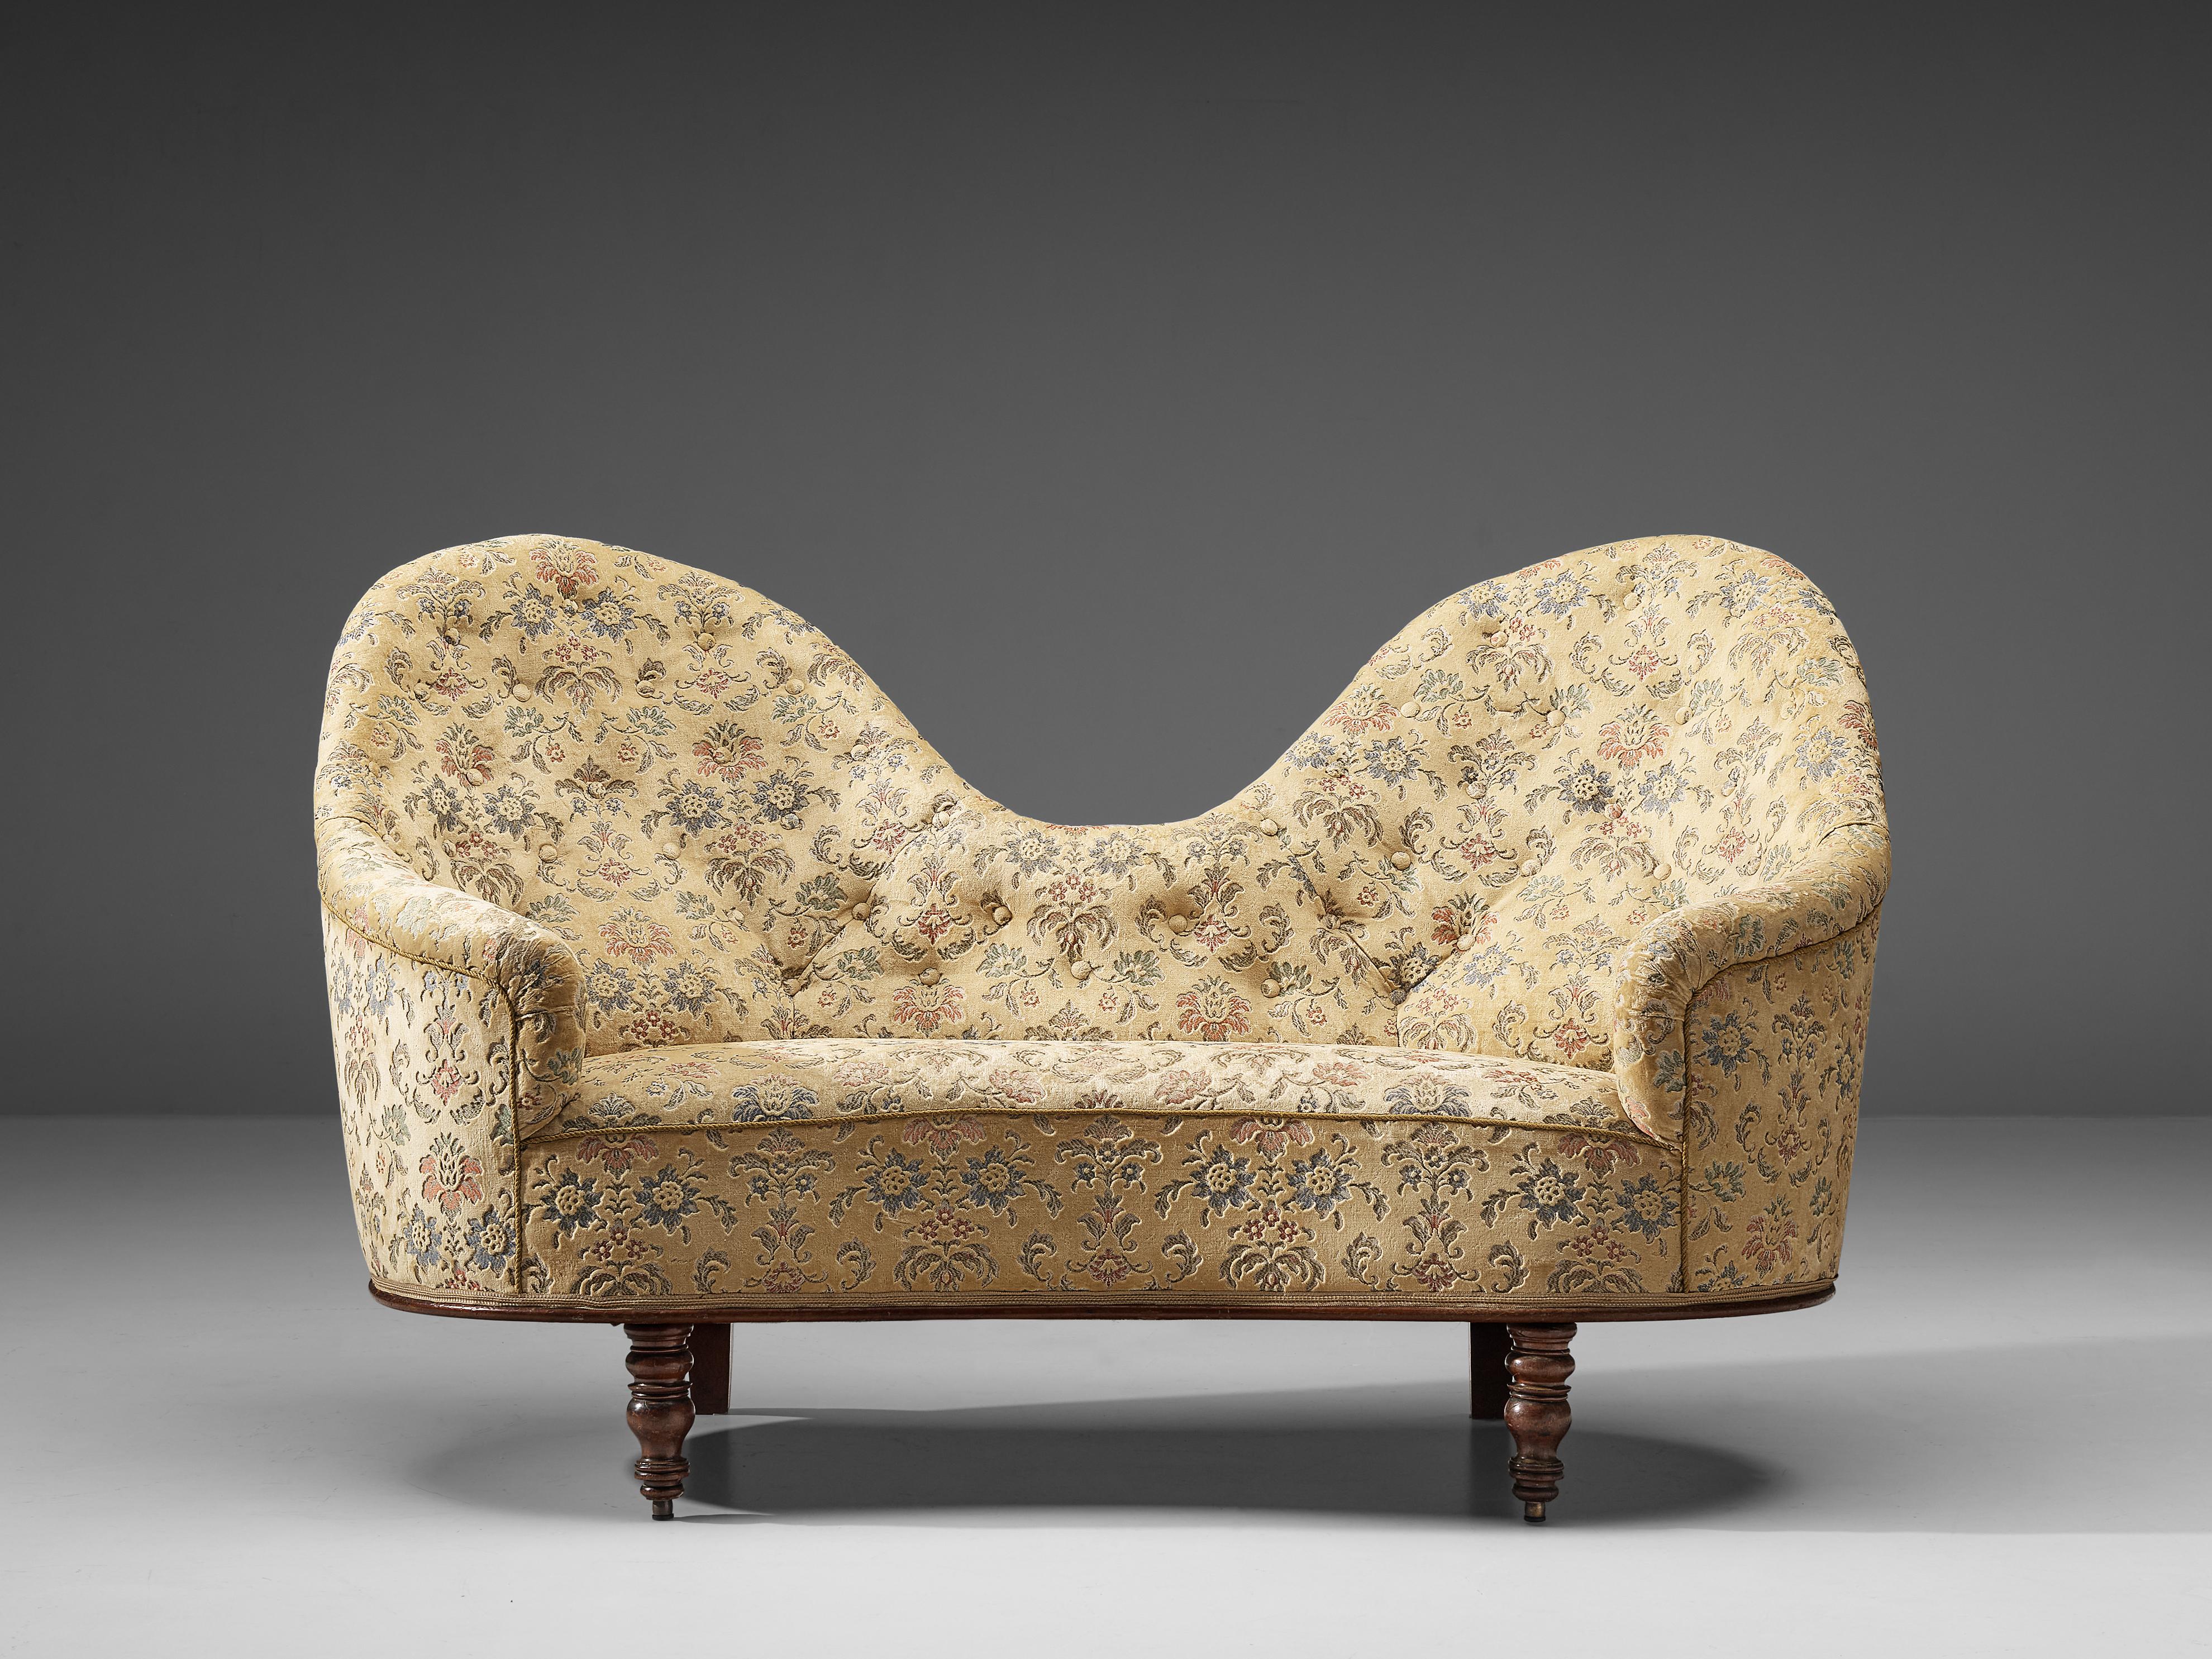 Art Deco Sofa with Floral Upholstery